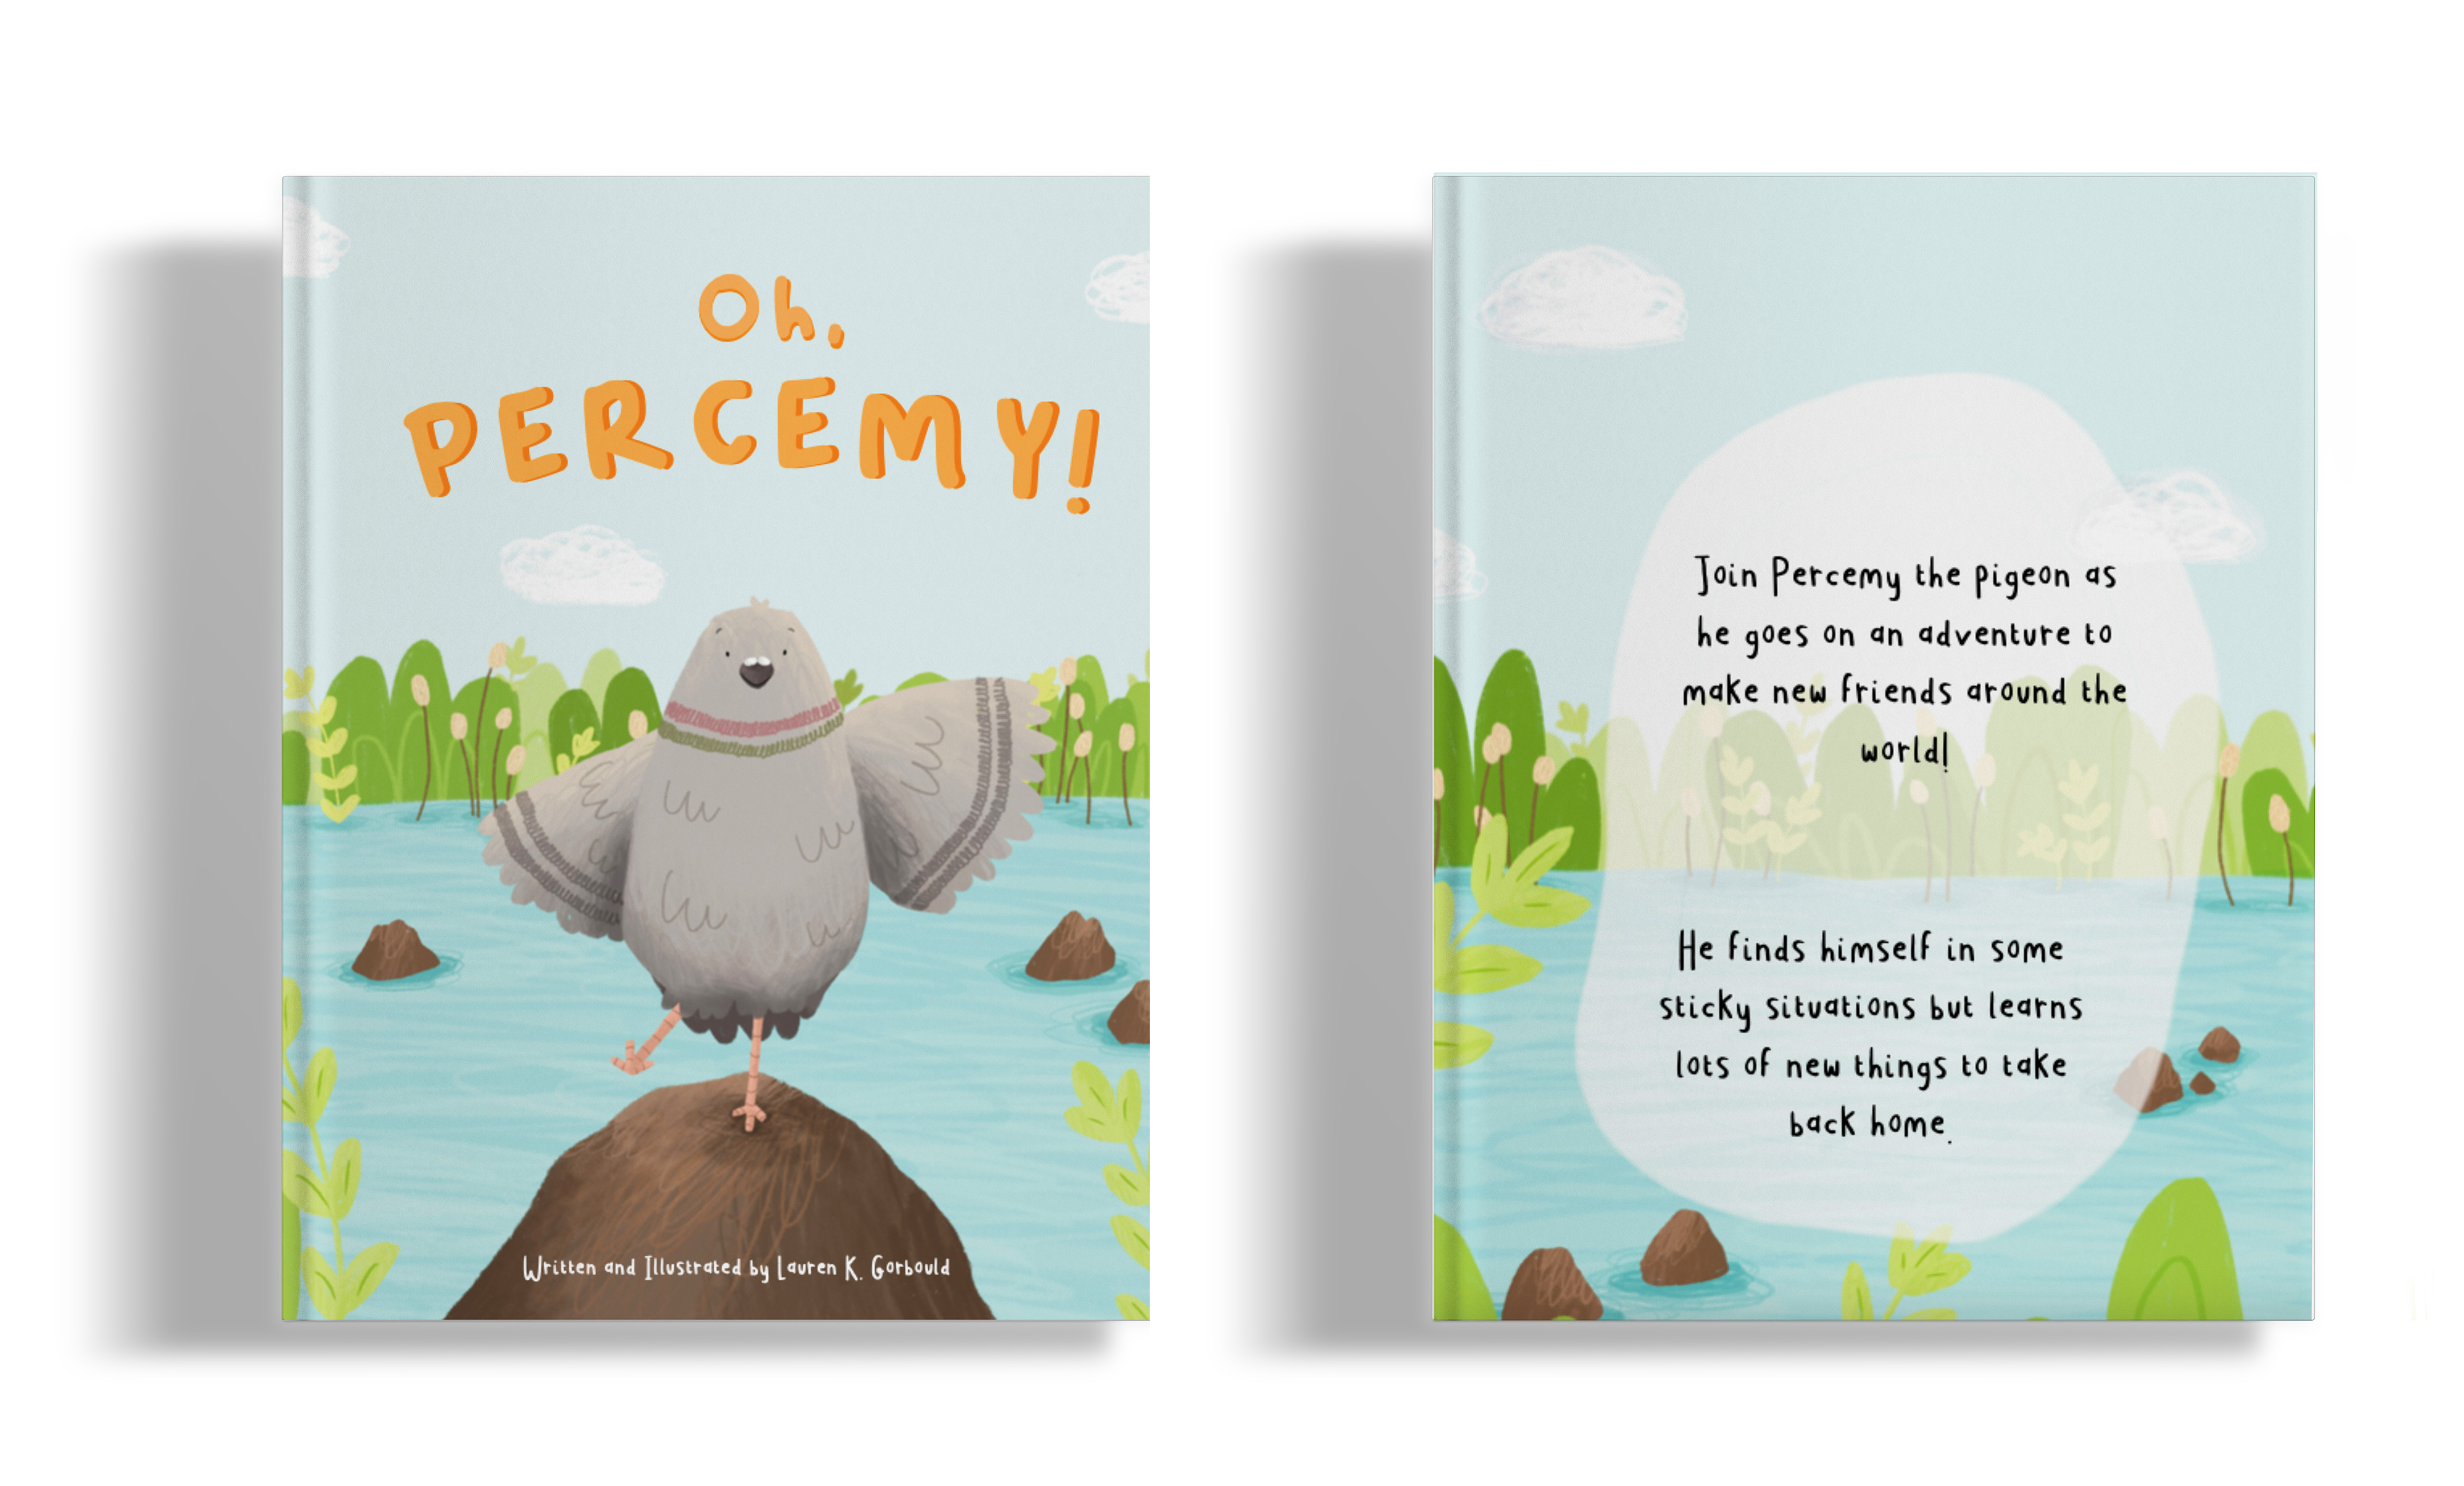 BA illustration showing Oh Percemy Pigeon book cover. A pigeon stands on one leg upon a brown rock with it's wings held open in a cute illustrative style